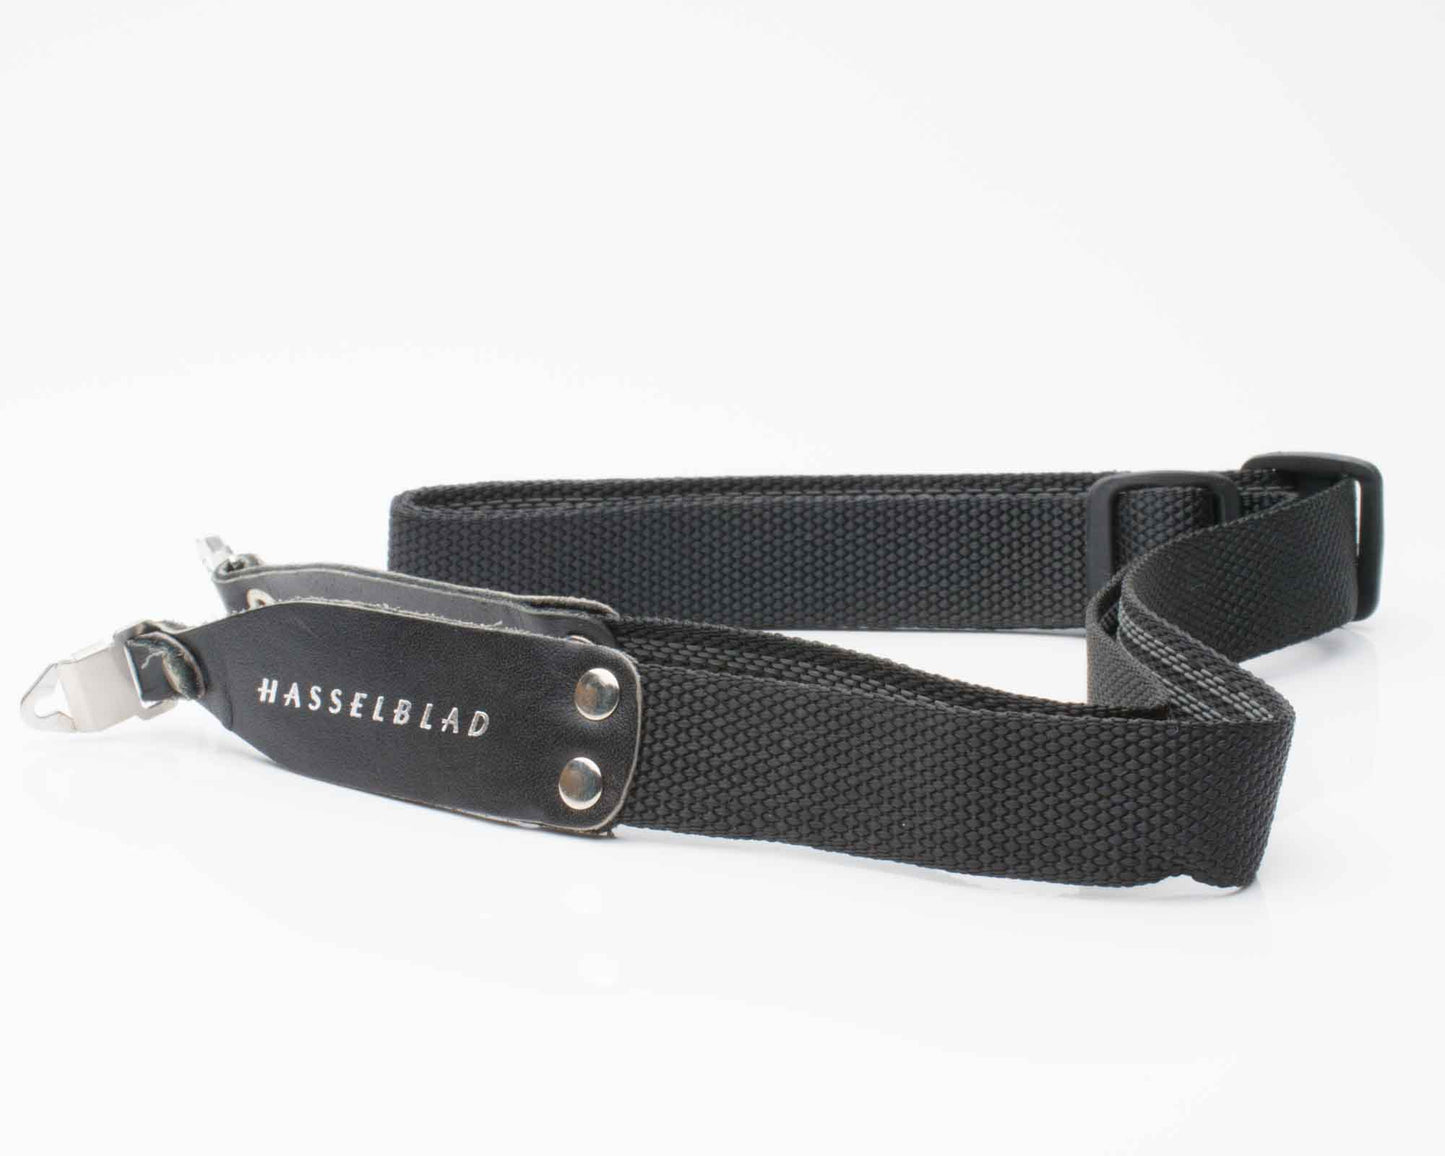 Hasselblad 1" Wide Neck Strap Rubber Backed 59110